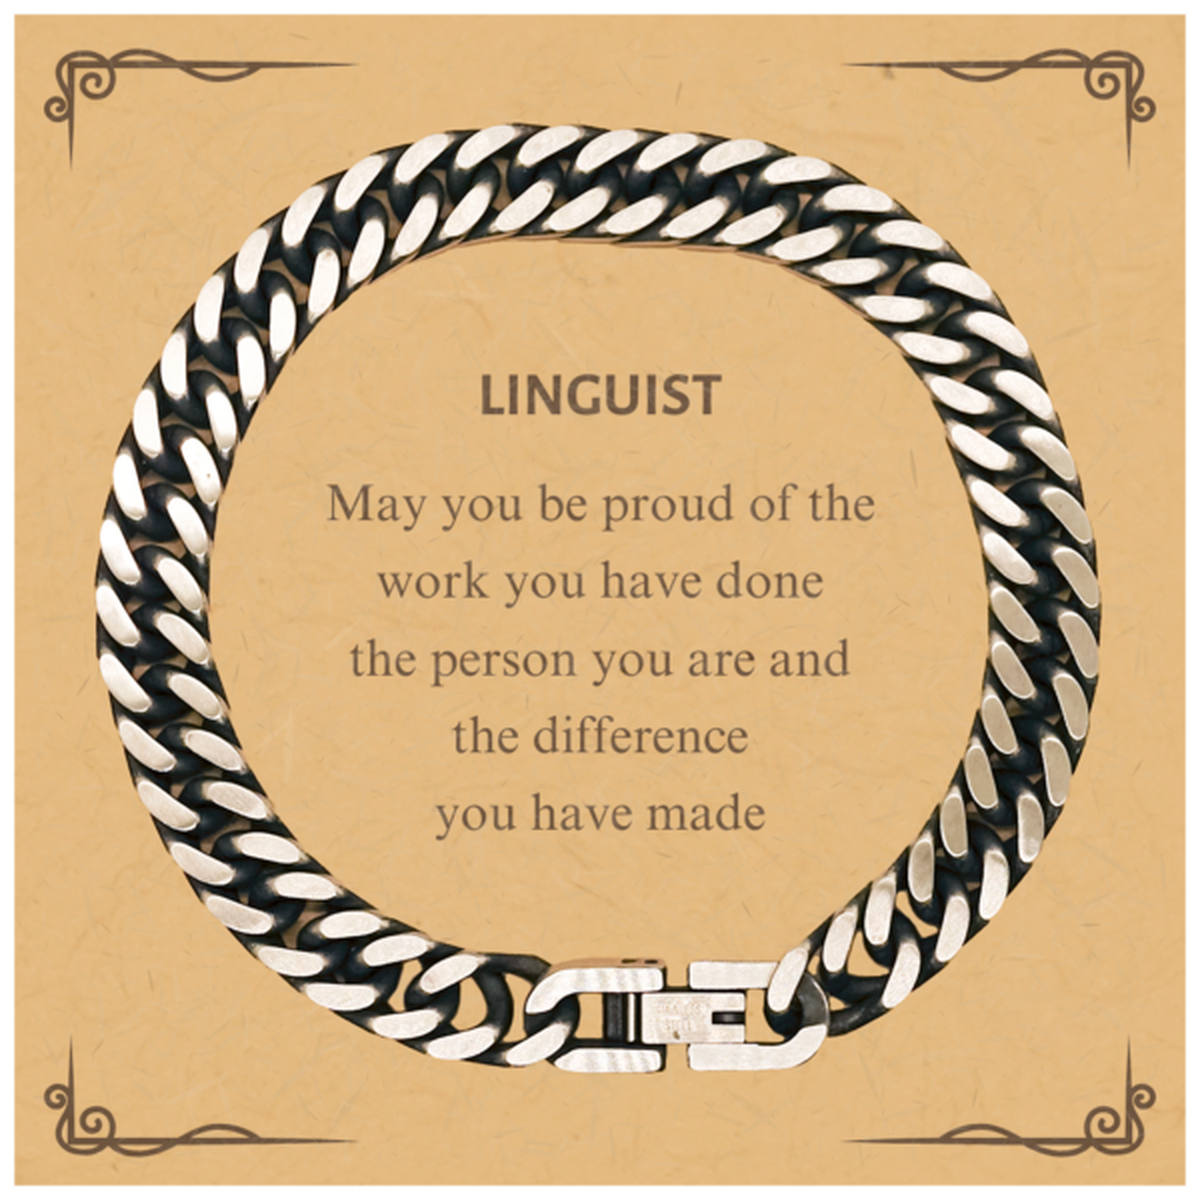 Linguist May you be proud of the work you have done, Retirement Linguist Cuban Link Chain Bracelet for Colleague Appreciation Gifts Amazing for Linguist